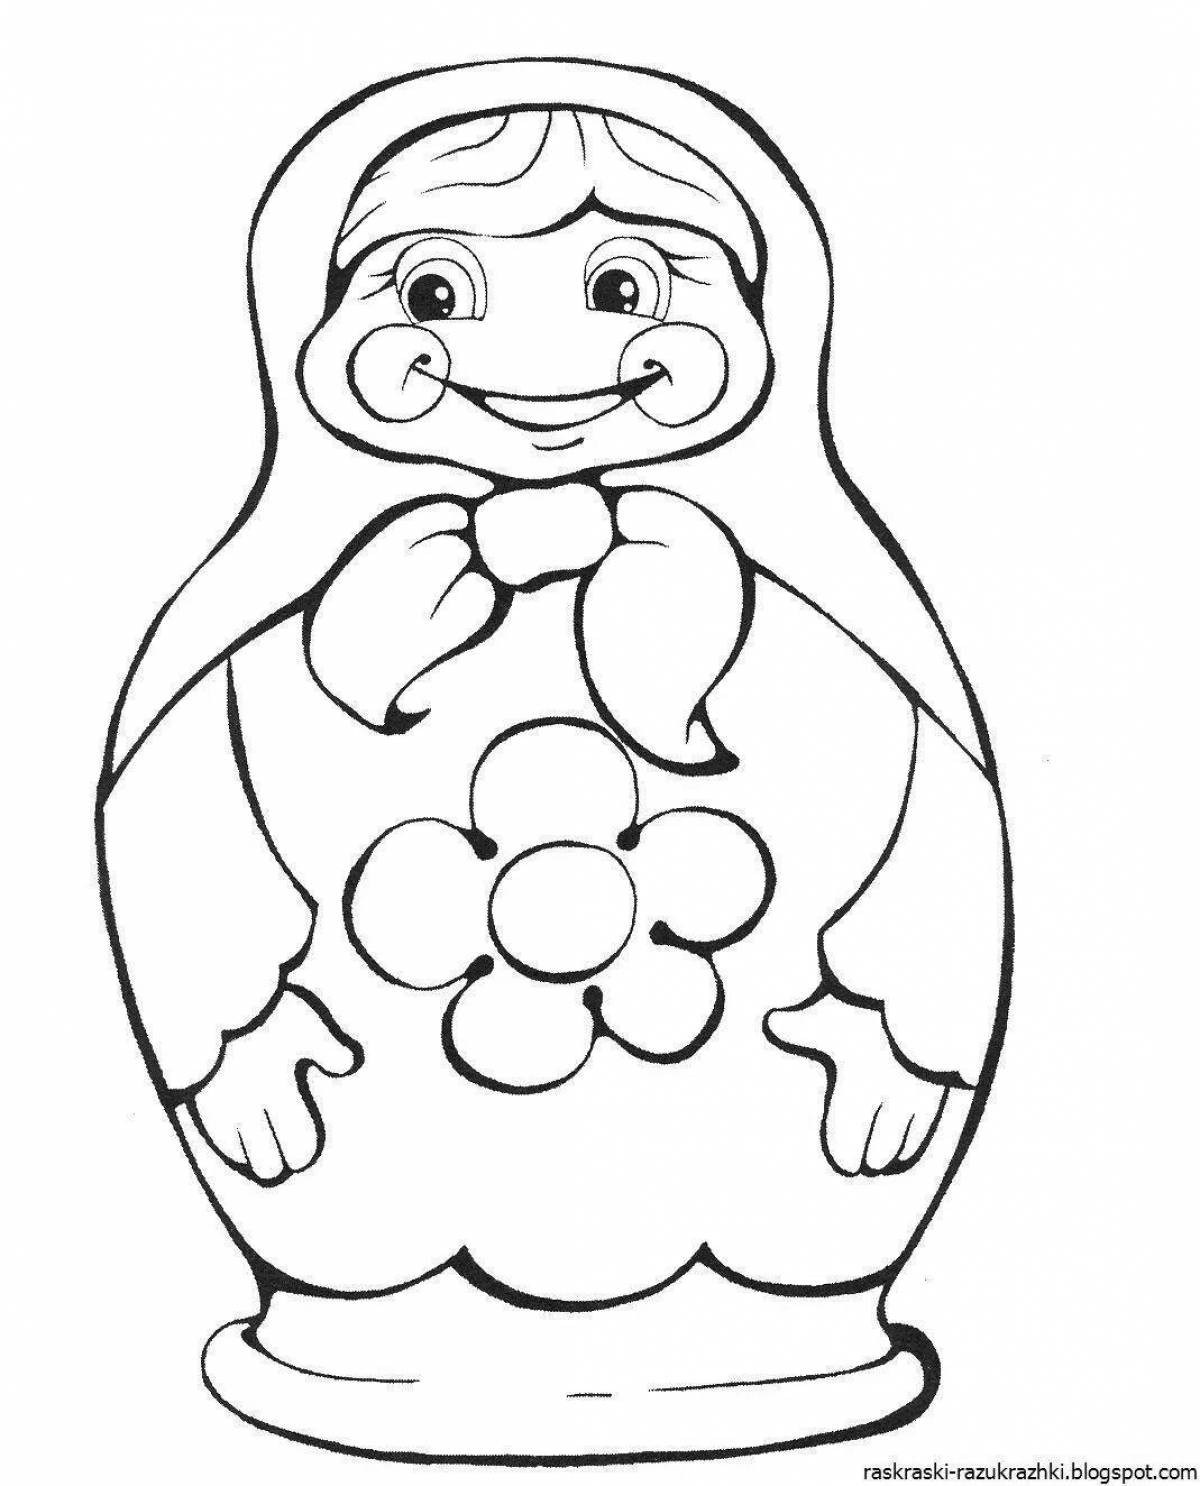 Sparkling Russian matryoshka coloring book for children 6-7 years old